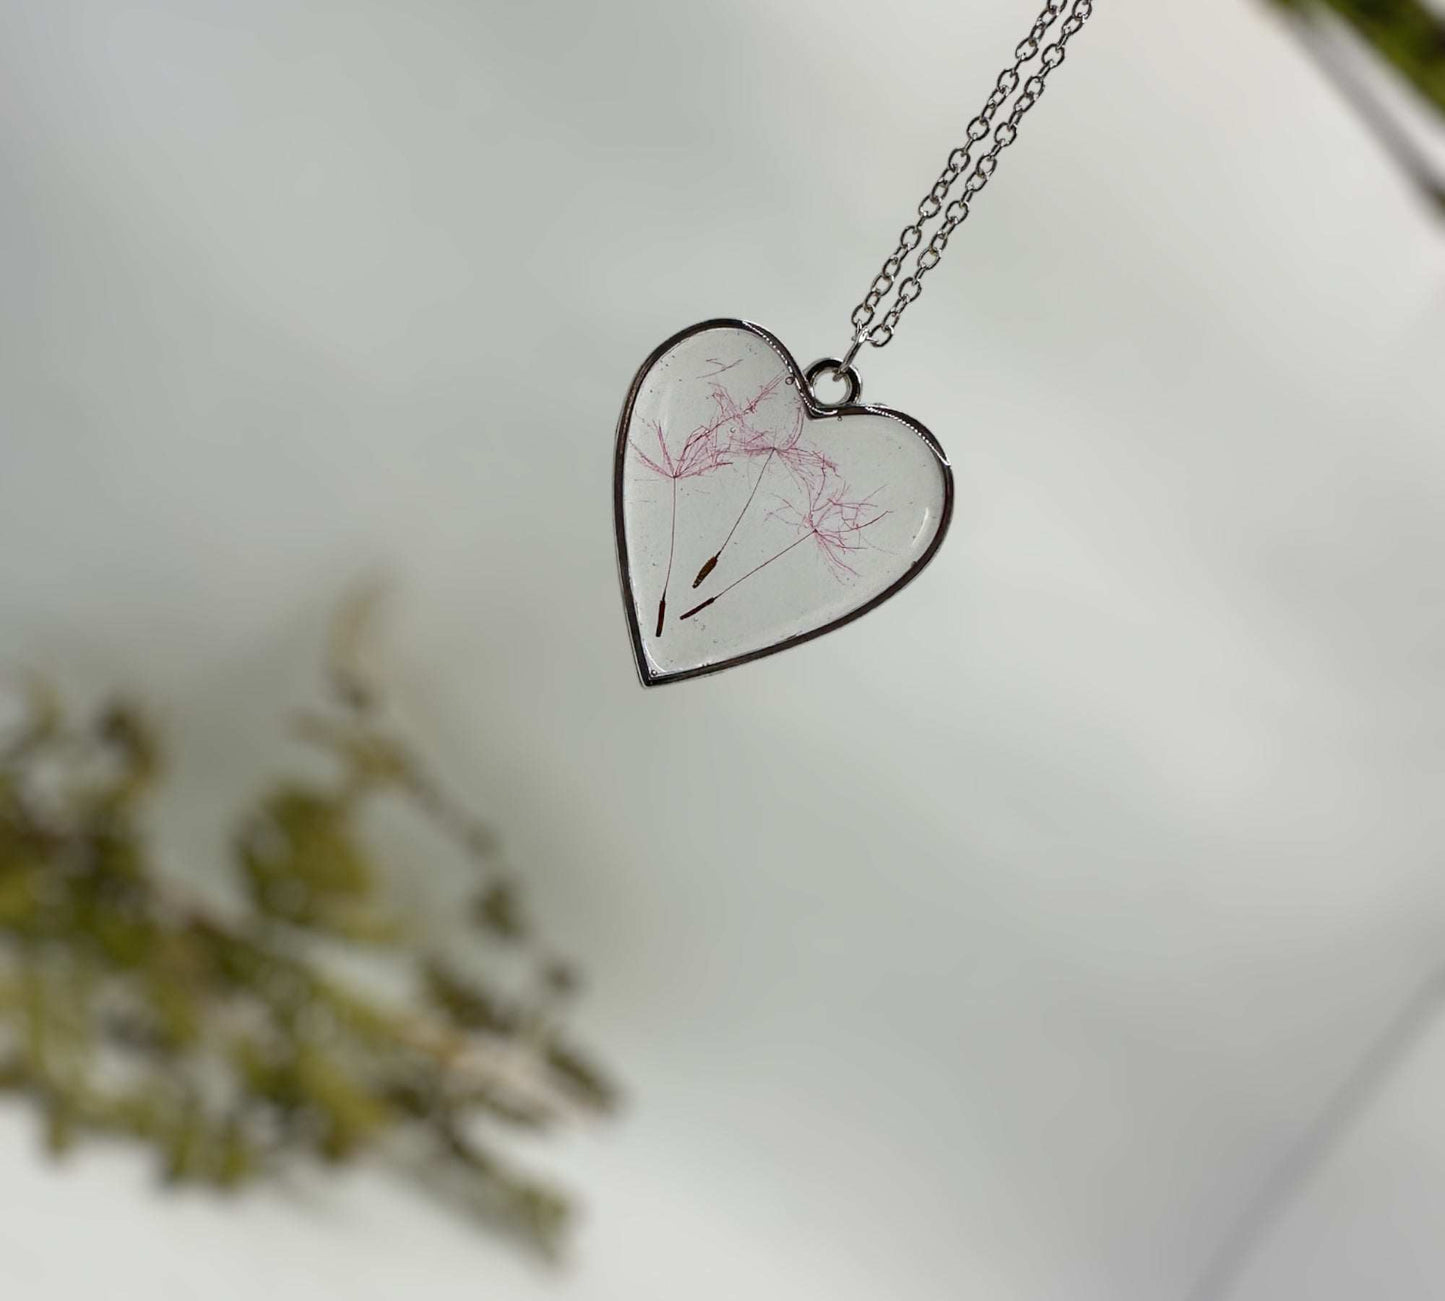 Fairy Wishes - Love & Wishes - Heart Resin Pendant with Fairy Wishes